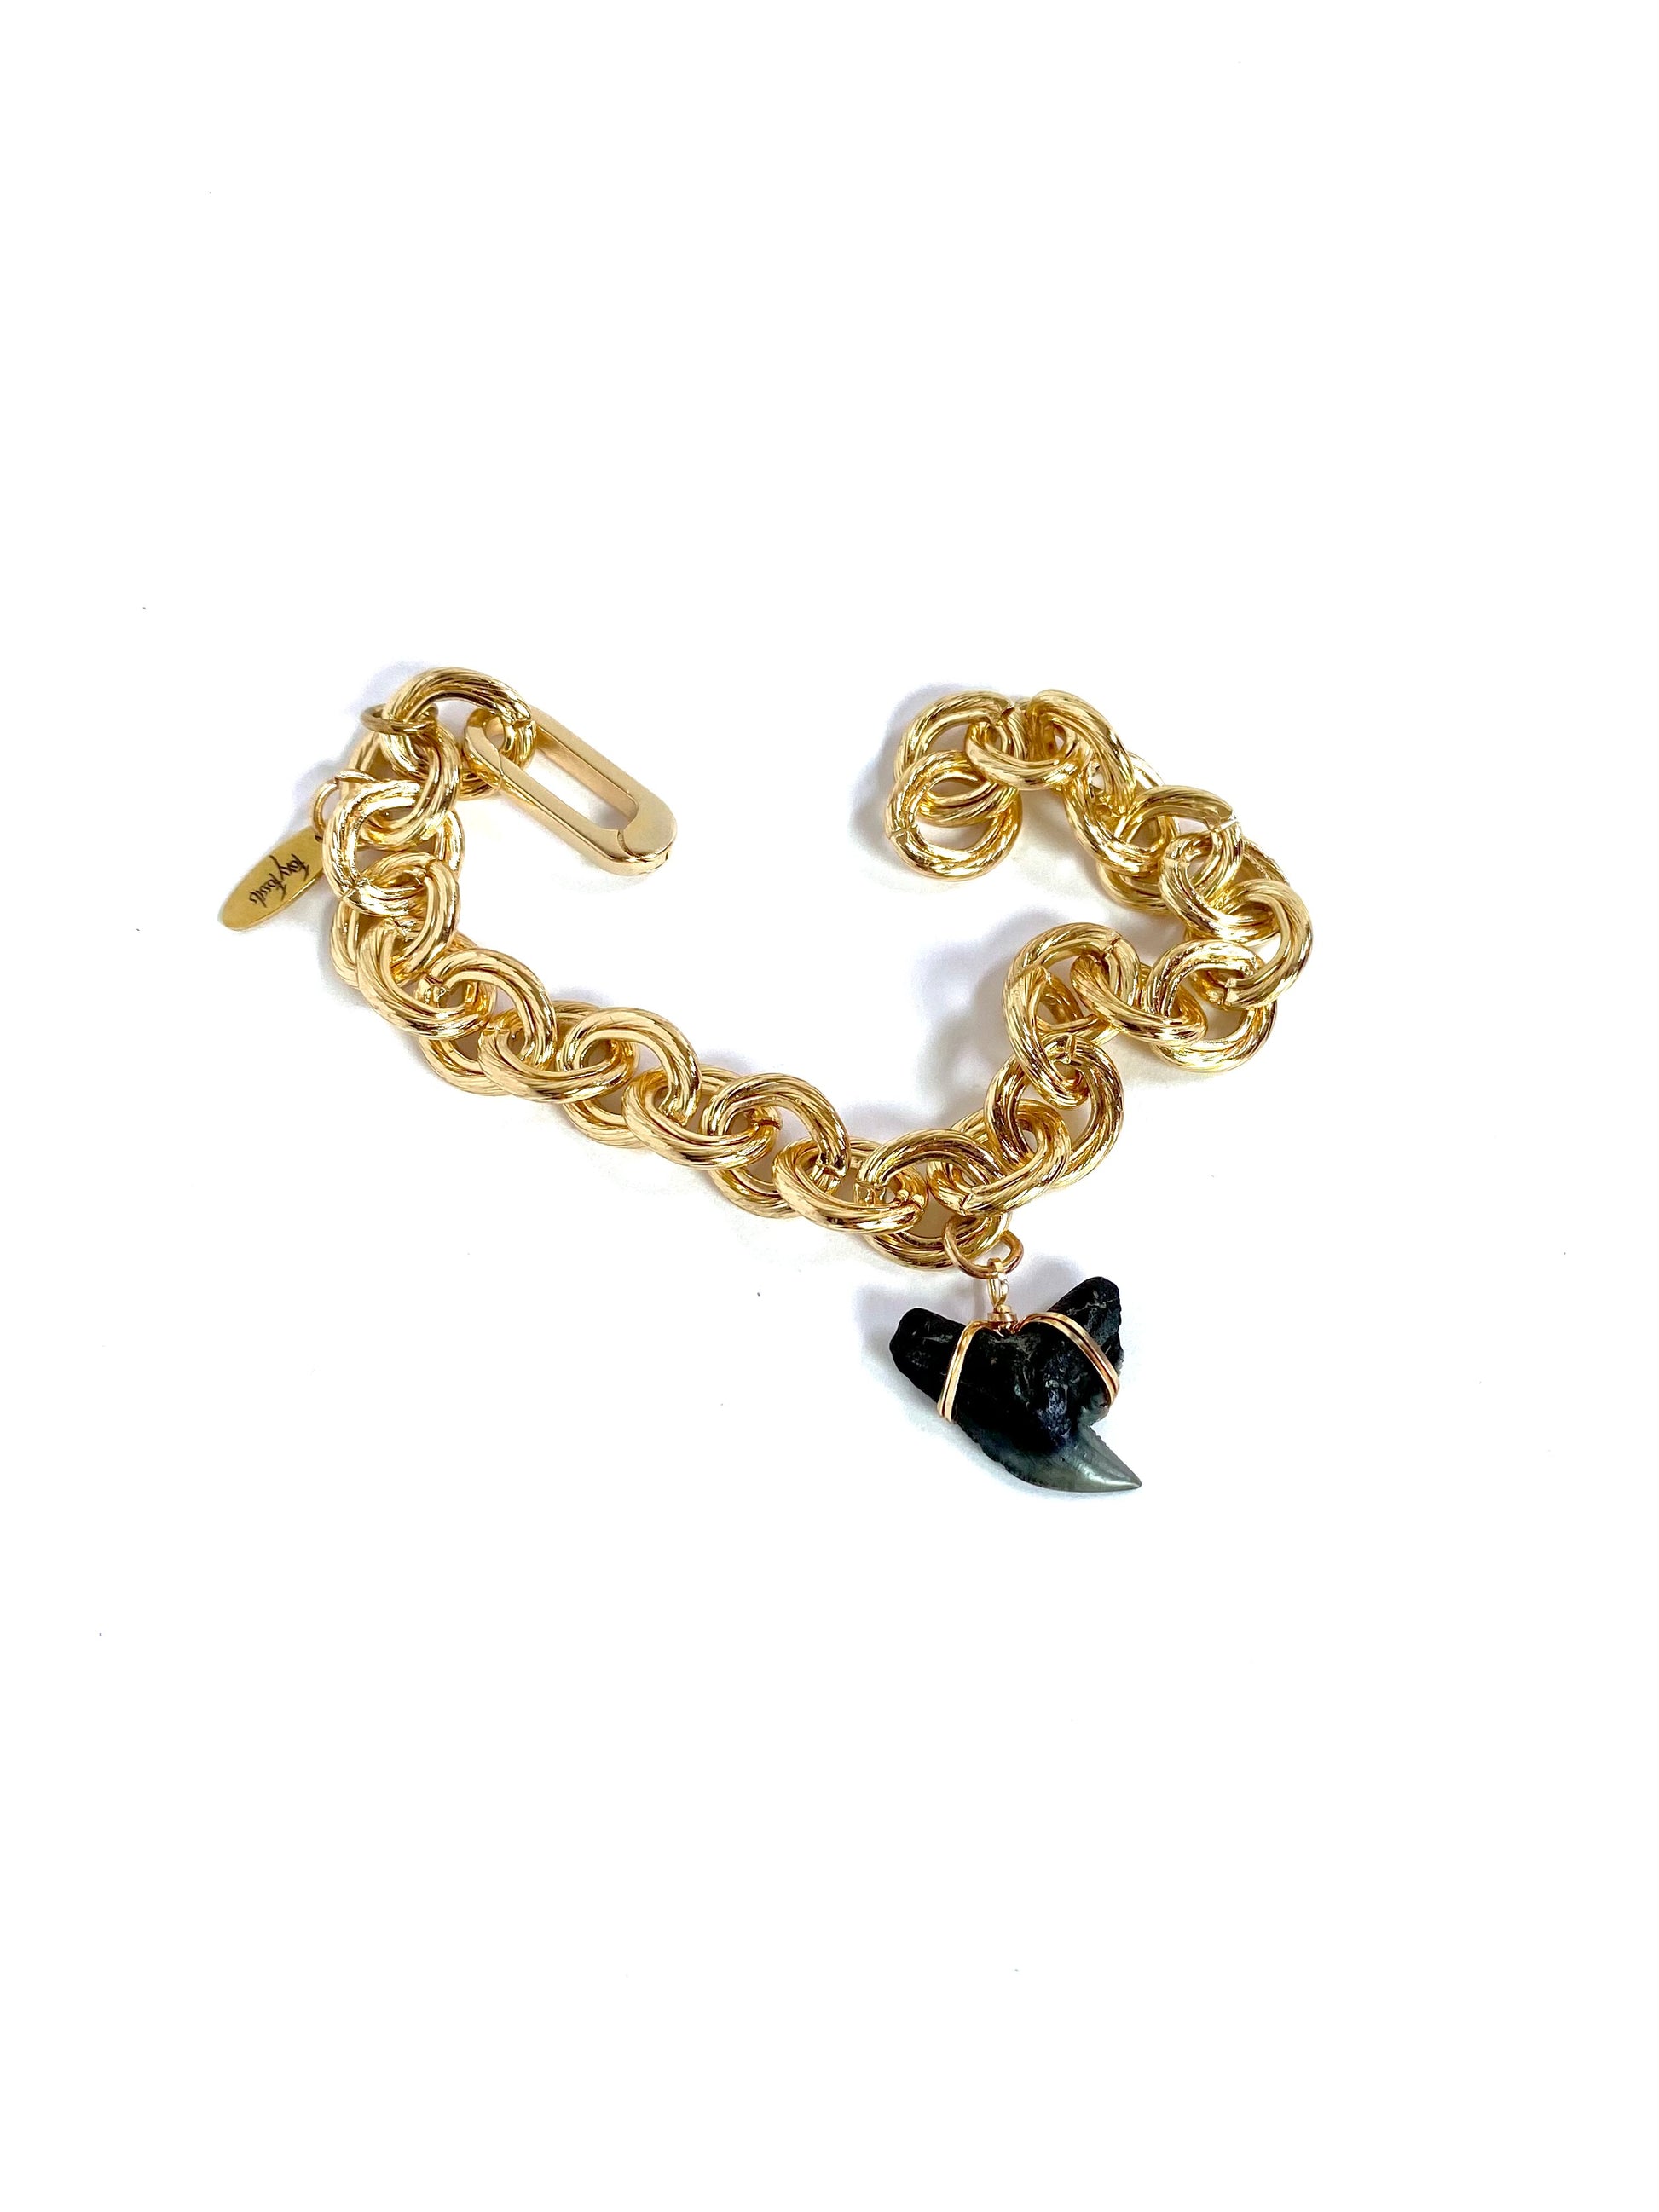 chunky gold chain bracelet with tiger shark tooth charm